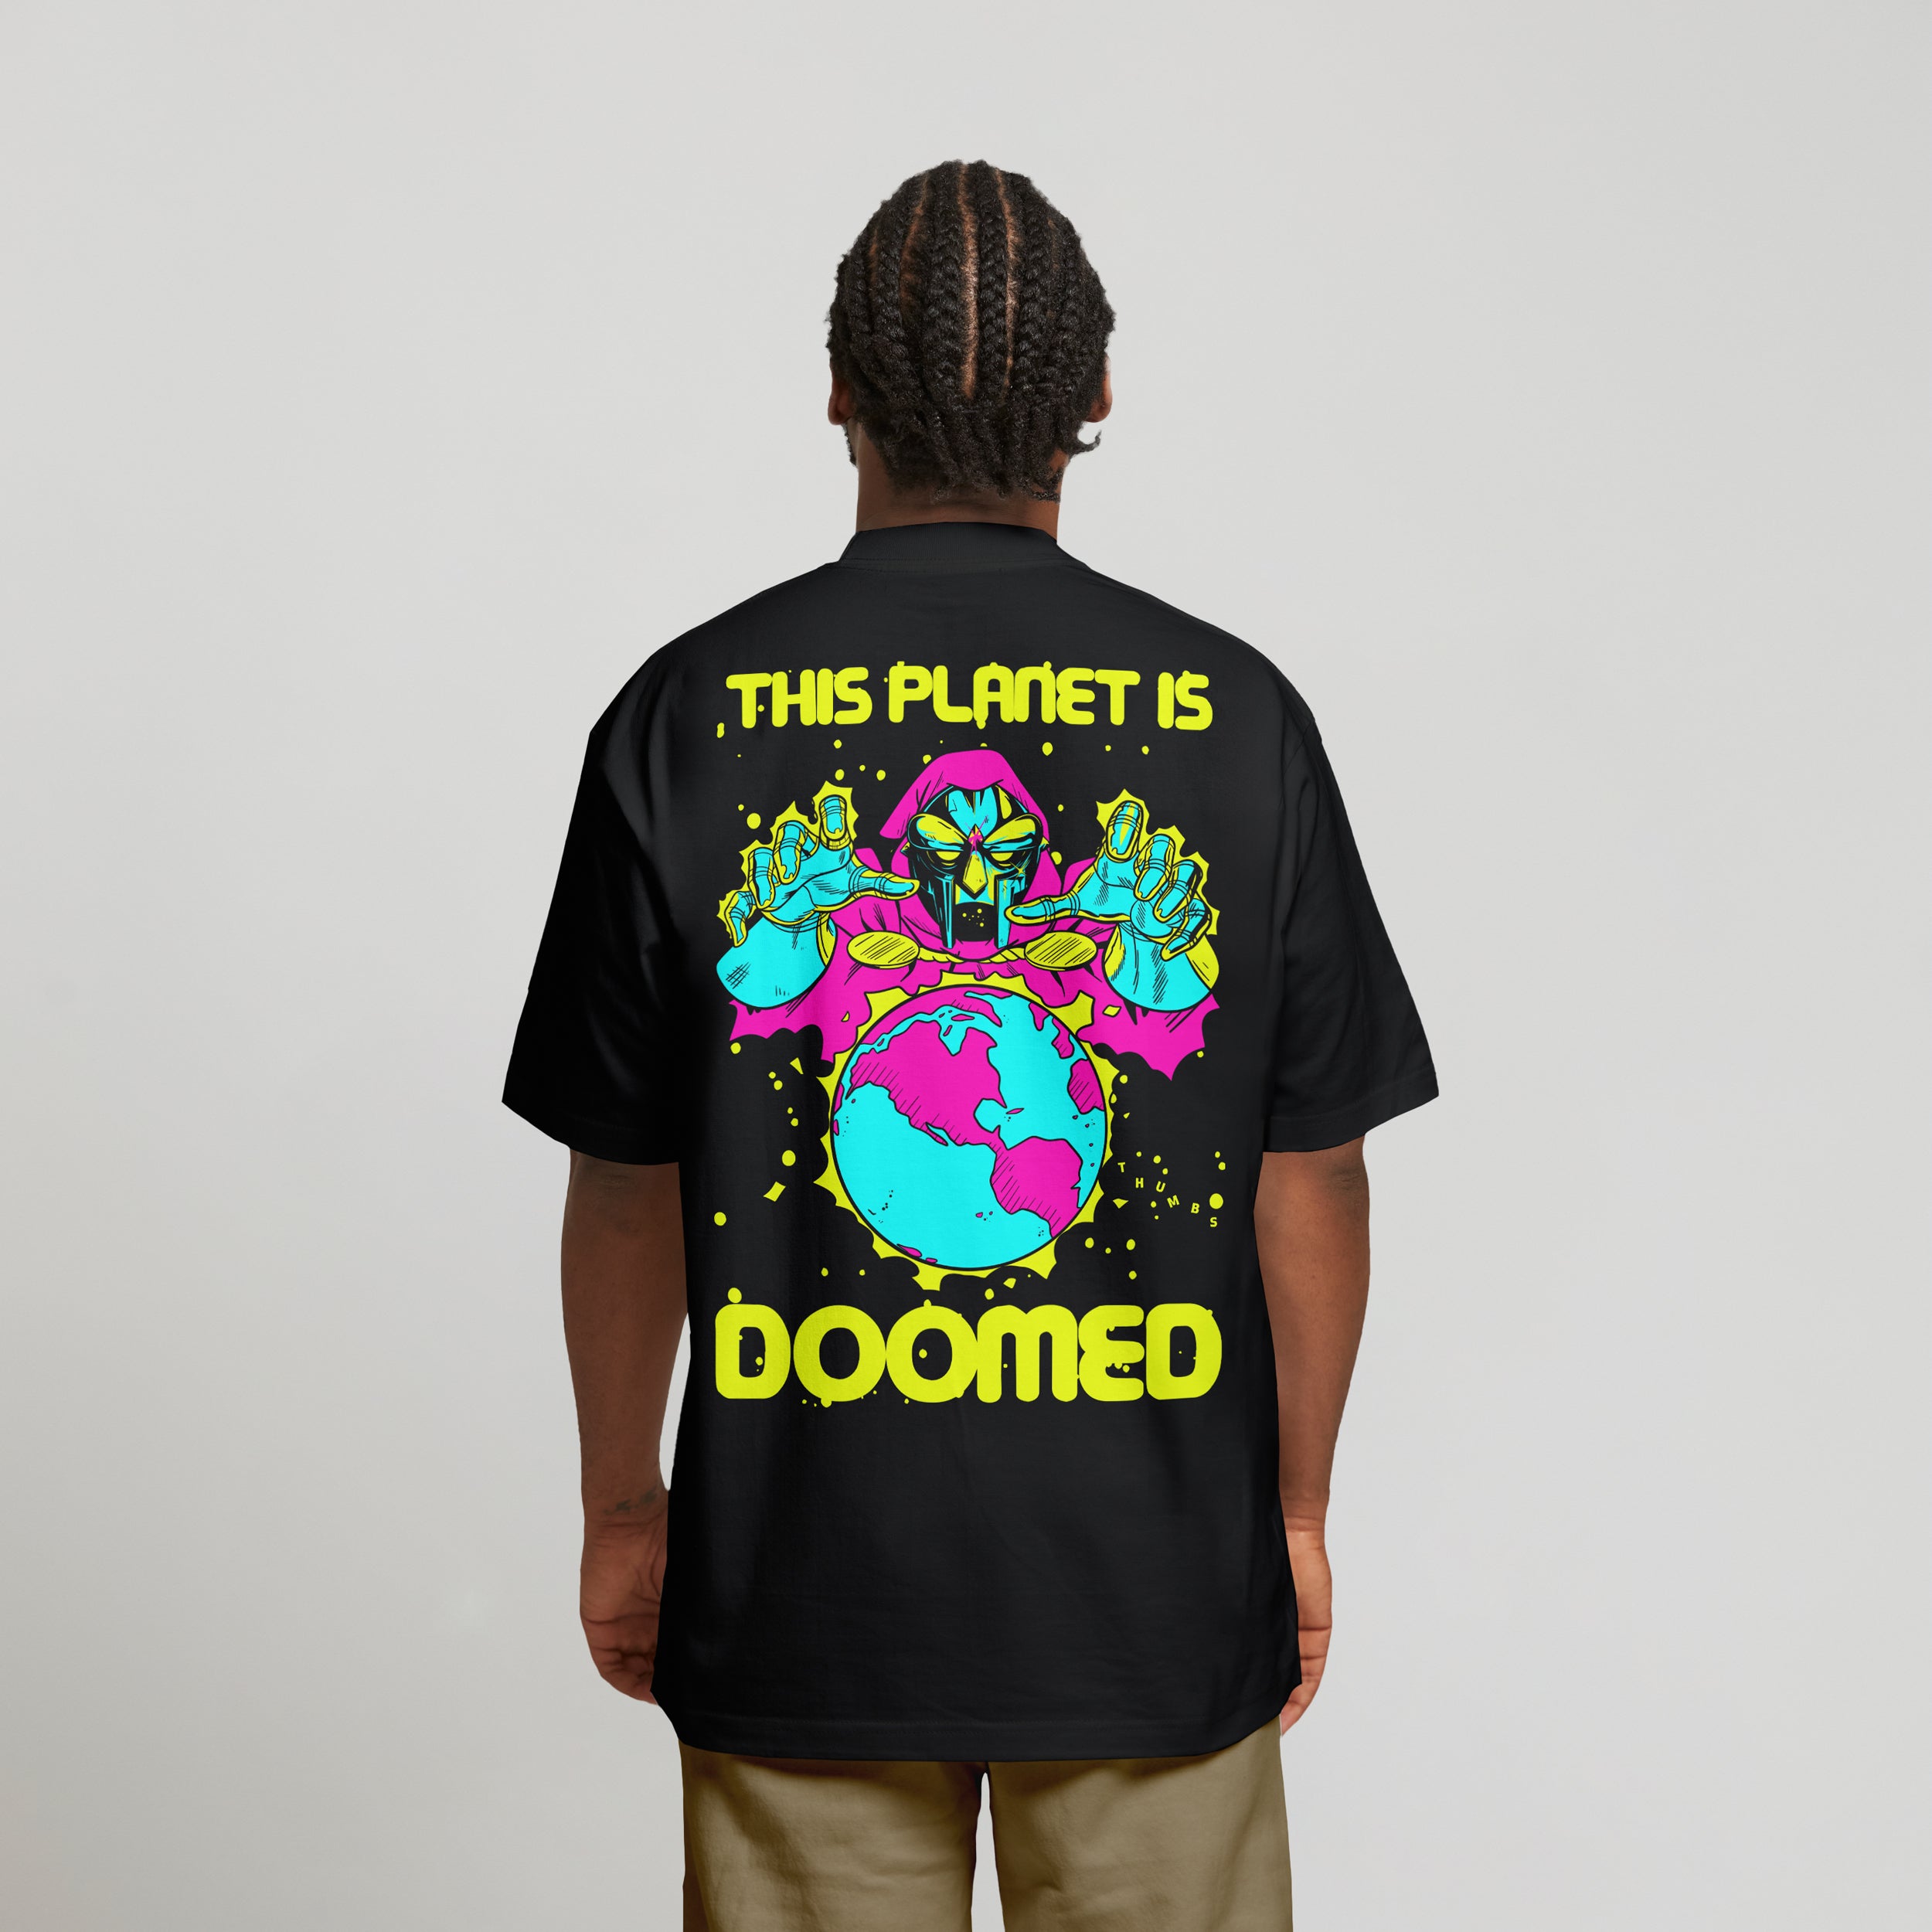 This Planet is Doomed T-Shirt